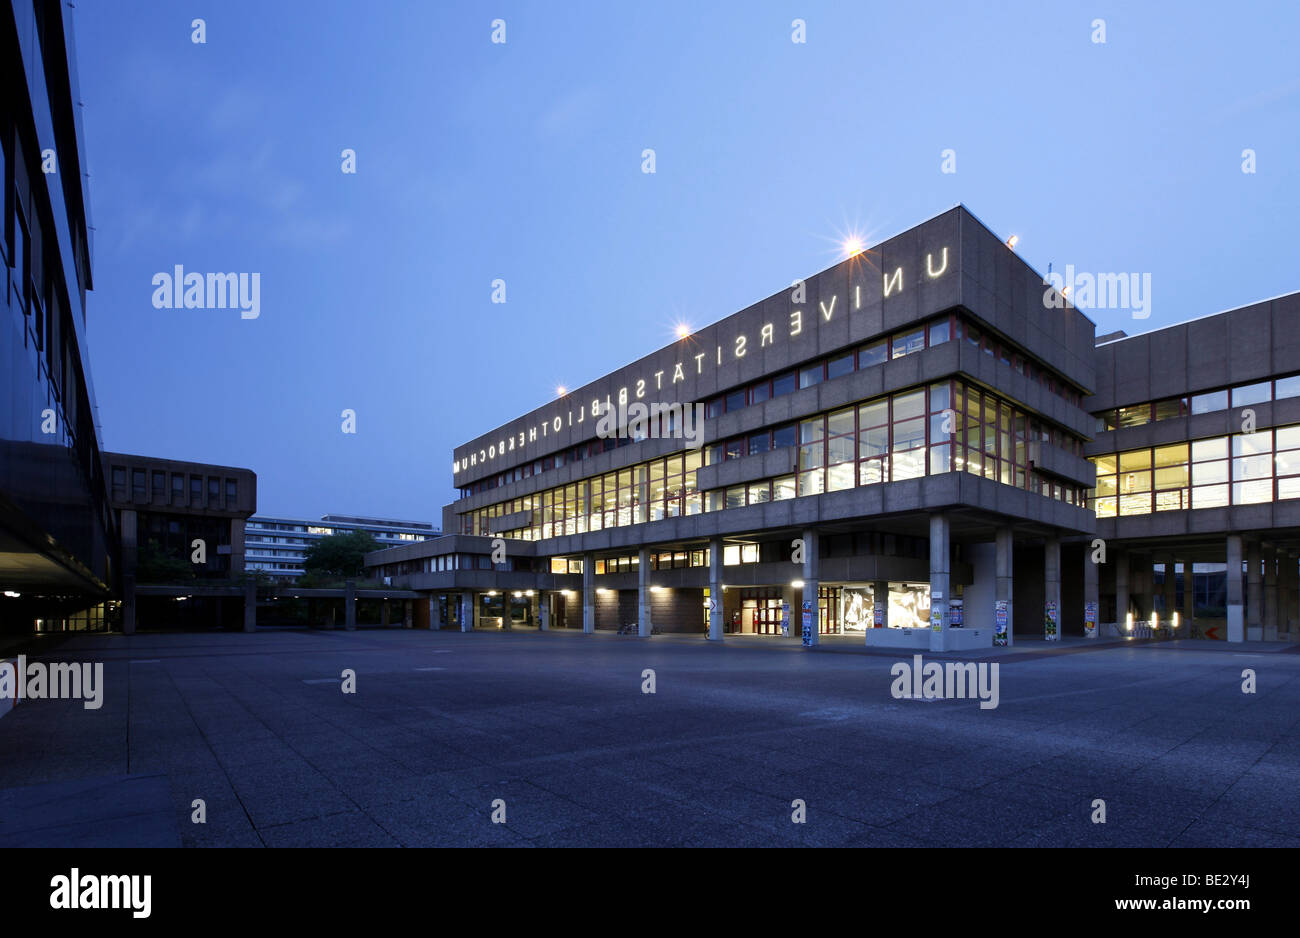 University Library of the Ruhr University Bochum, with mirrored lettering, Bochum, Ruhr, North Rhine-Westphalia, Germany, Europe Stock Photo